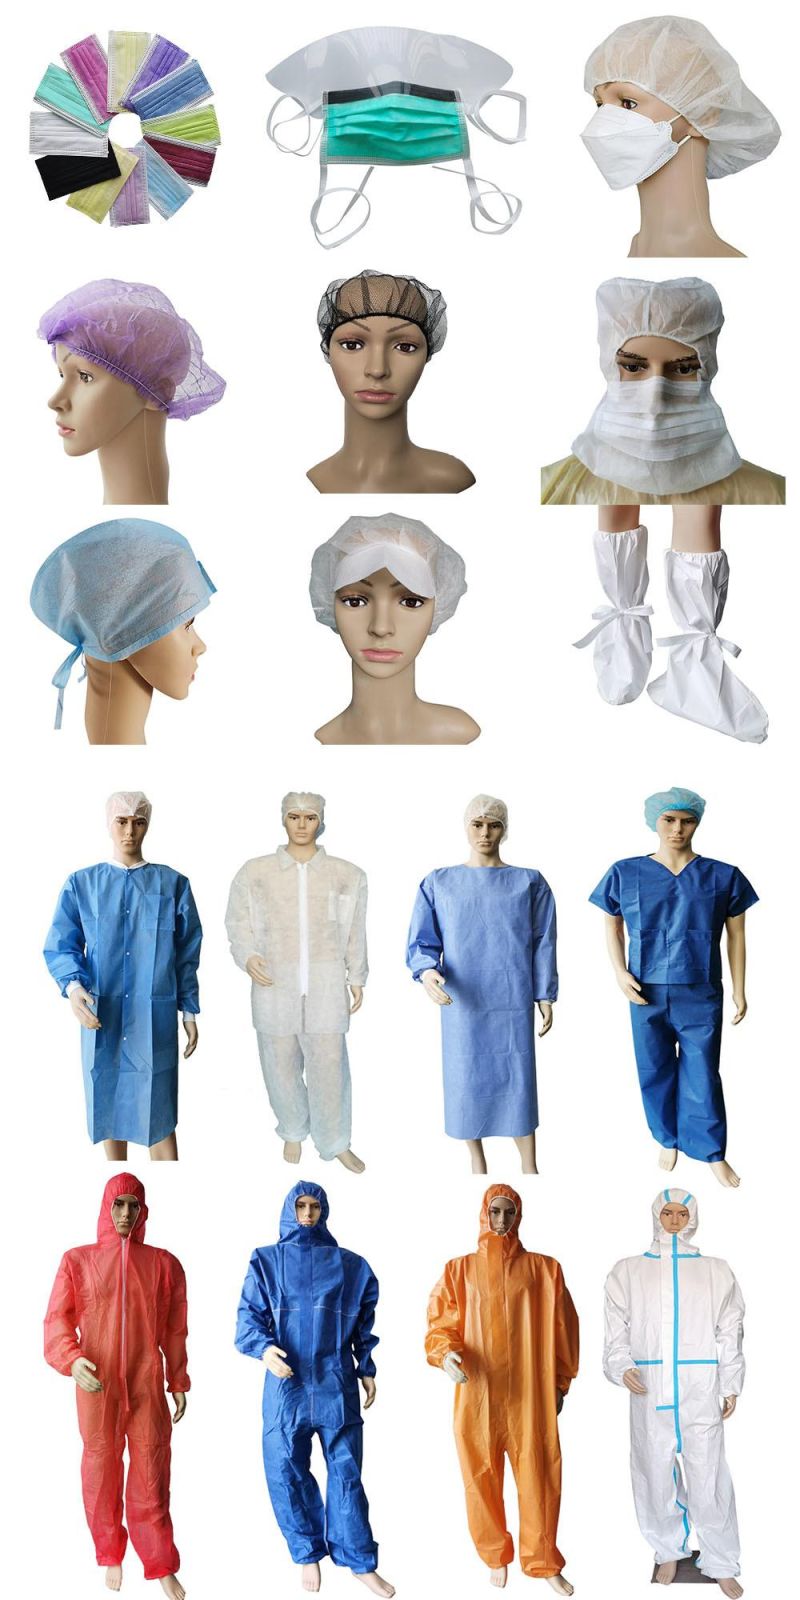 Disposable Non Woven Exam Gowns Fluid Resistant Blue PP Isolation Gown Smock Spp Visitor Cloak Polypropylene Surgeon Gown with Tie Closure